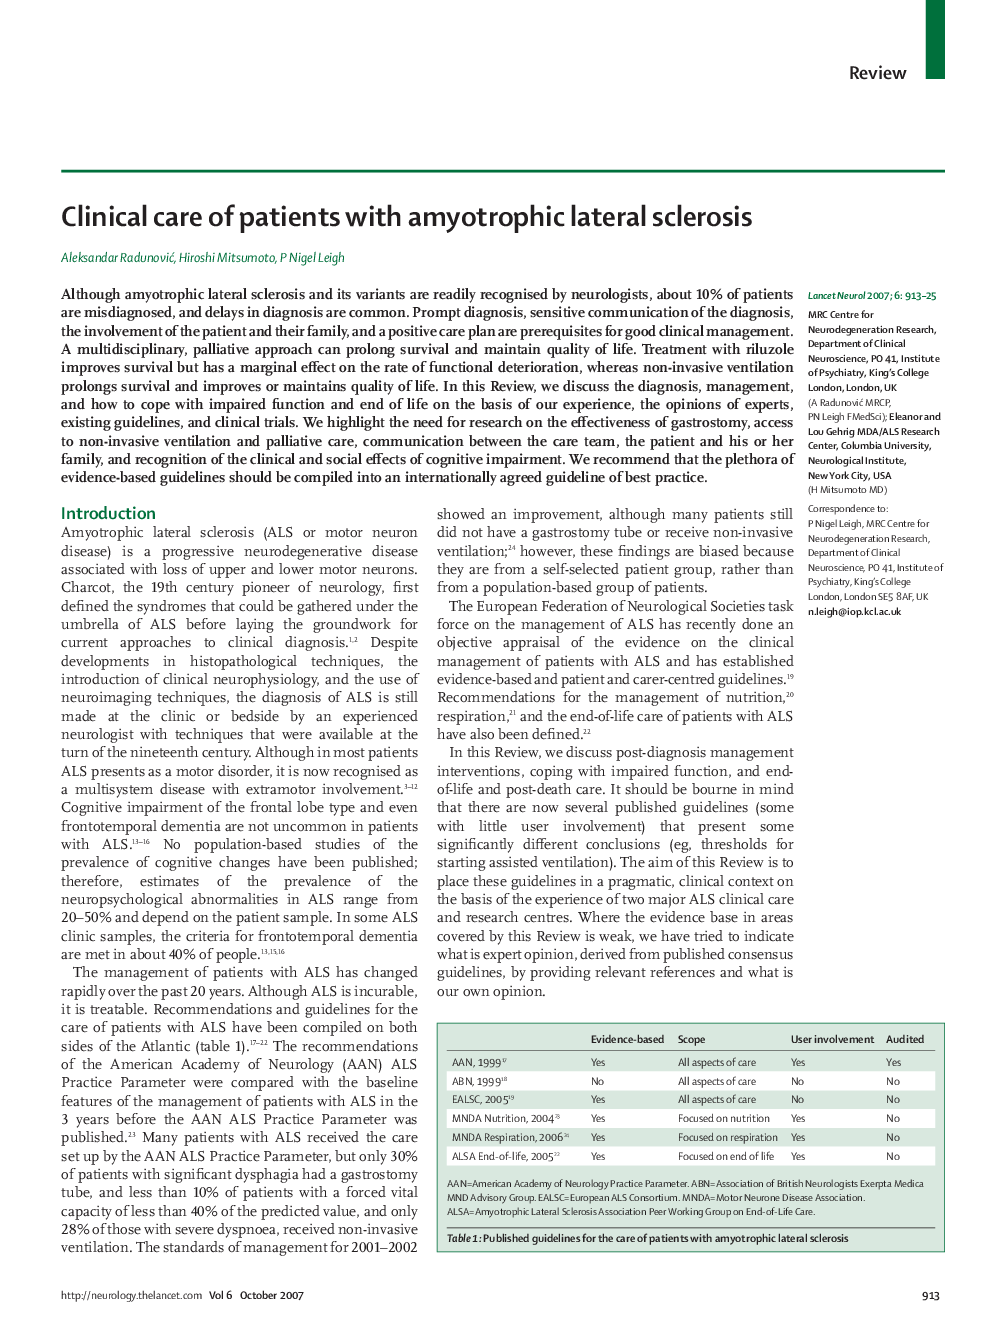 Clinical care of patients with amyotrophic lateral sclerosis